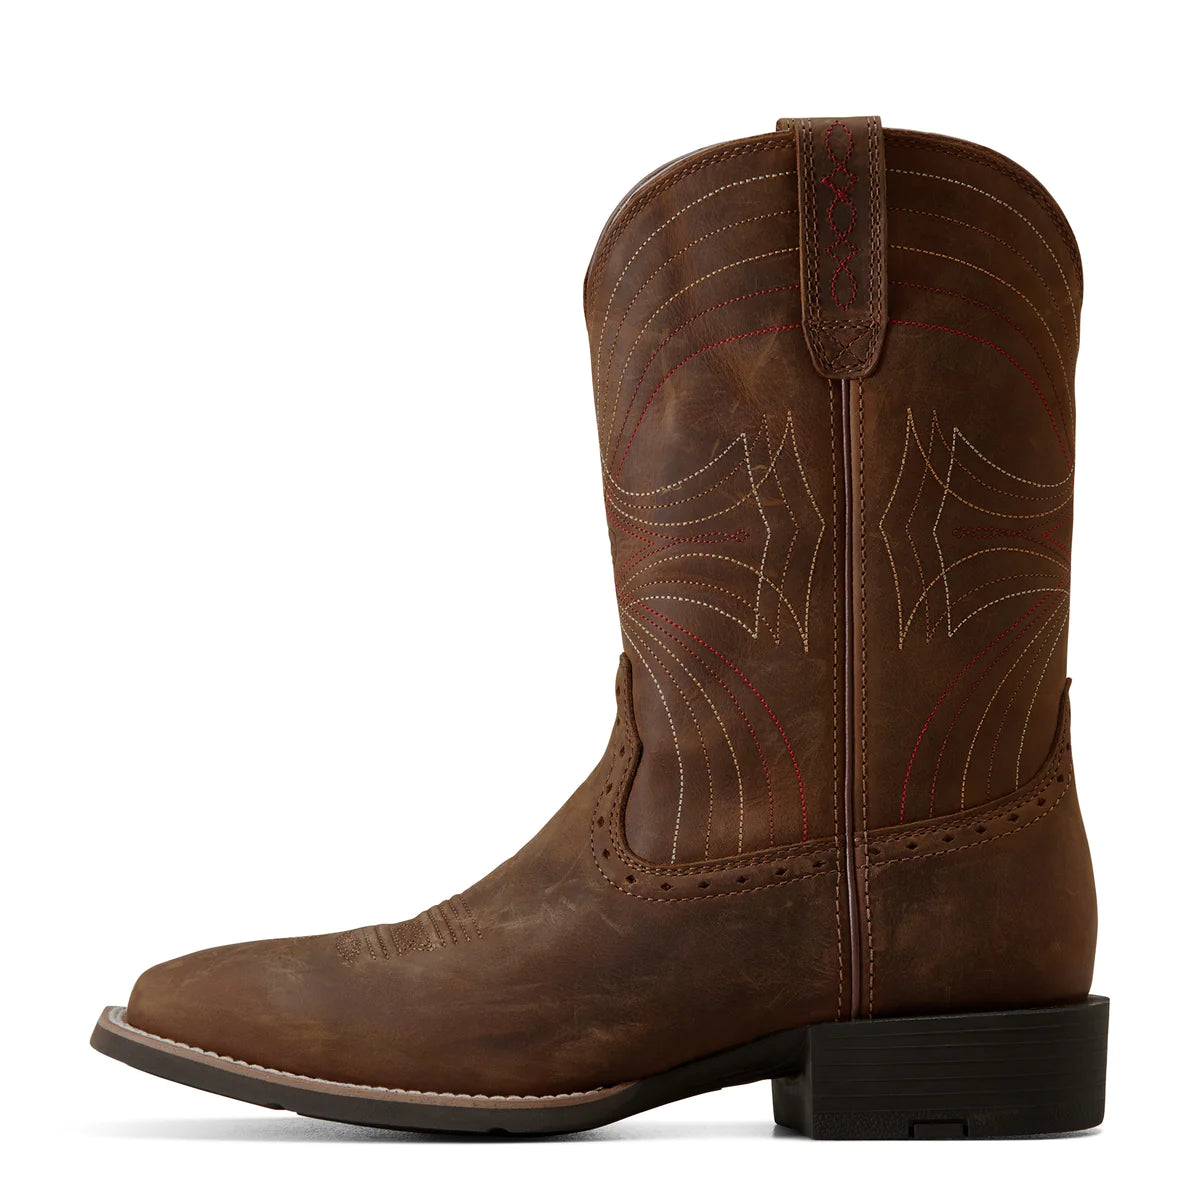 Ariat Mns Sport Wide Sq Toe Distressed Brown - CMC Special